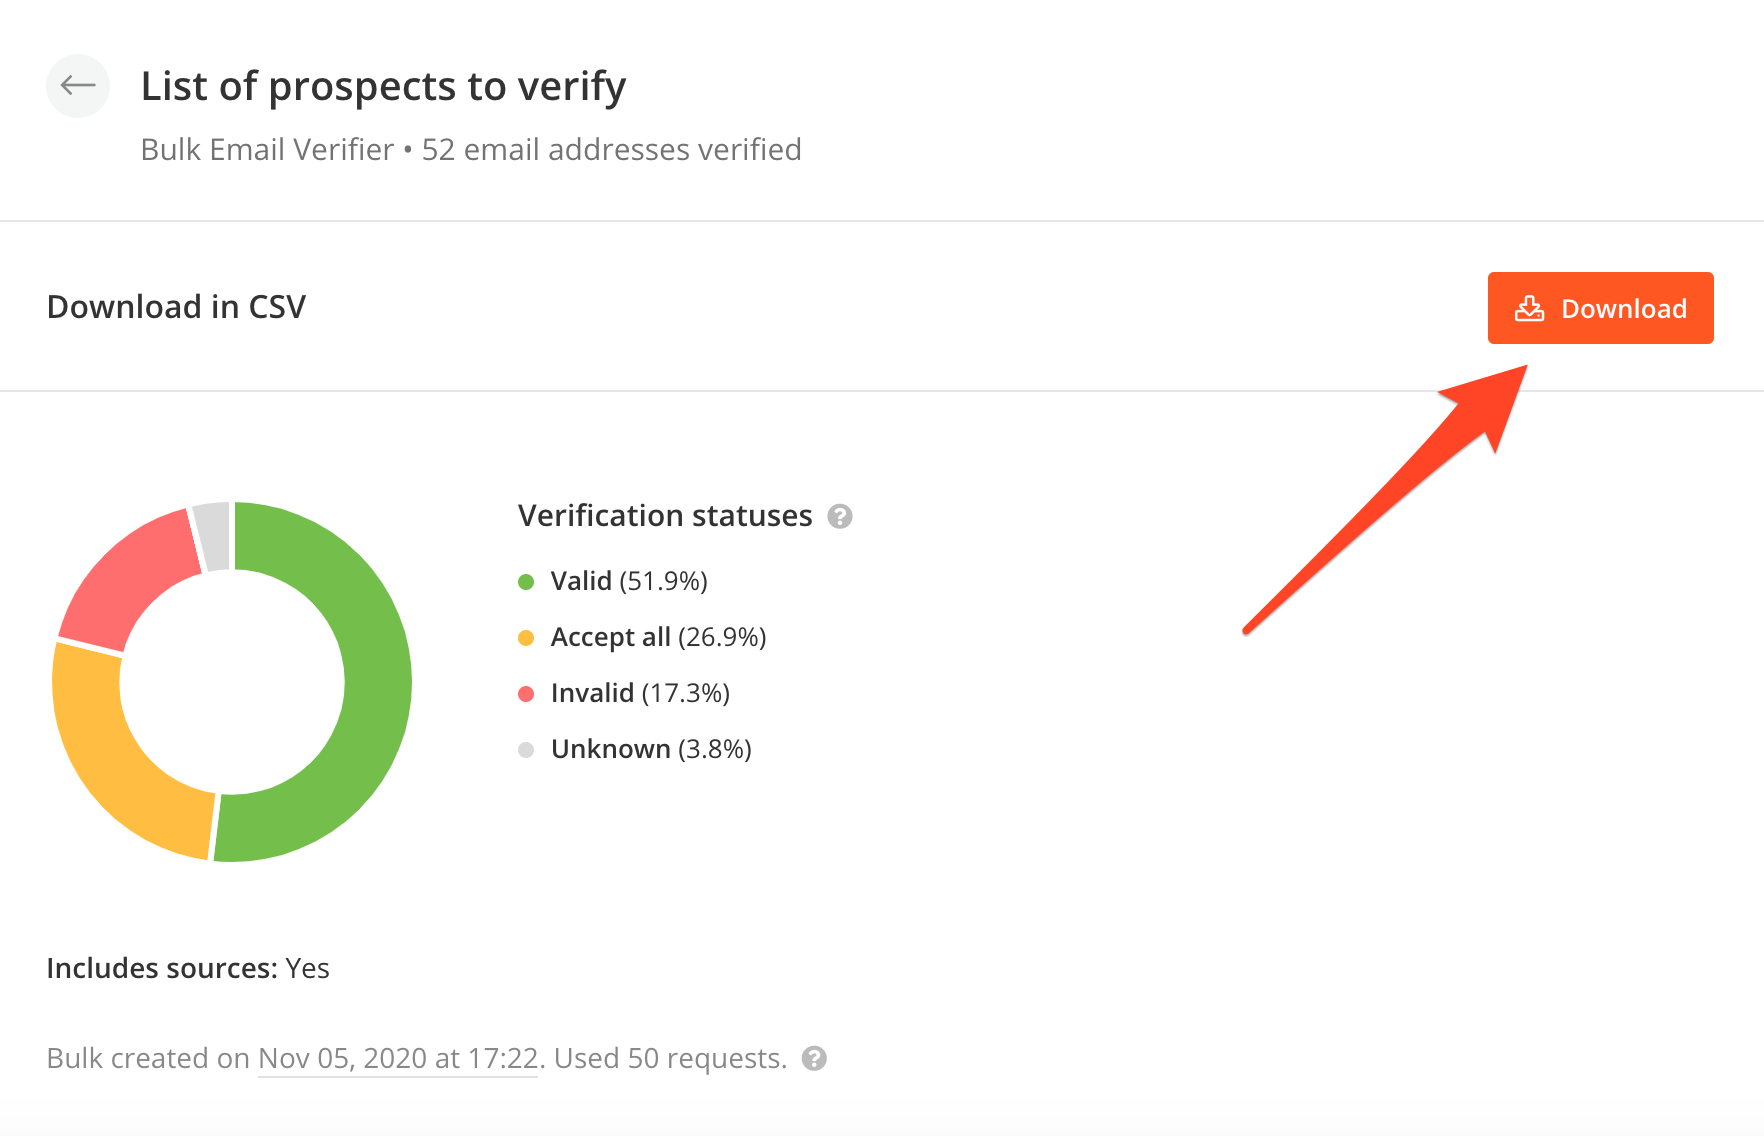 Results of email verification